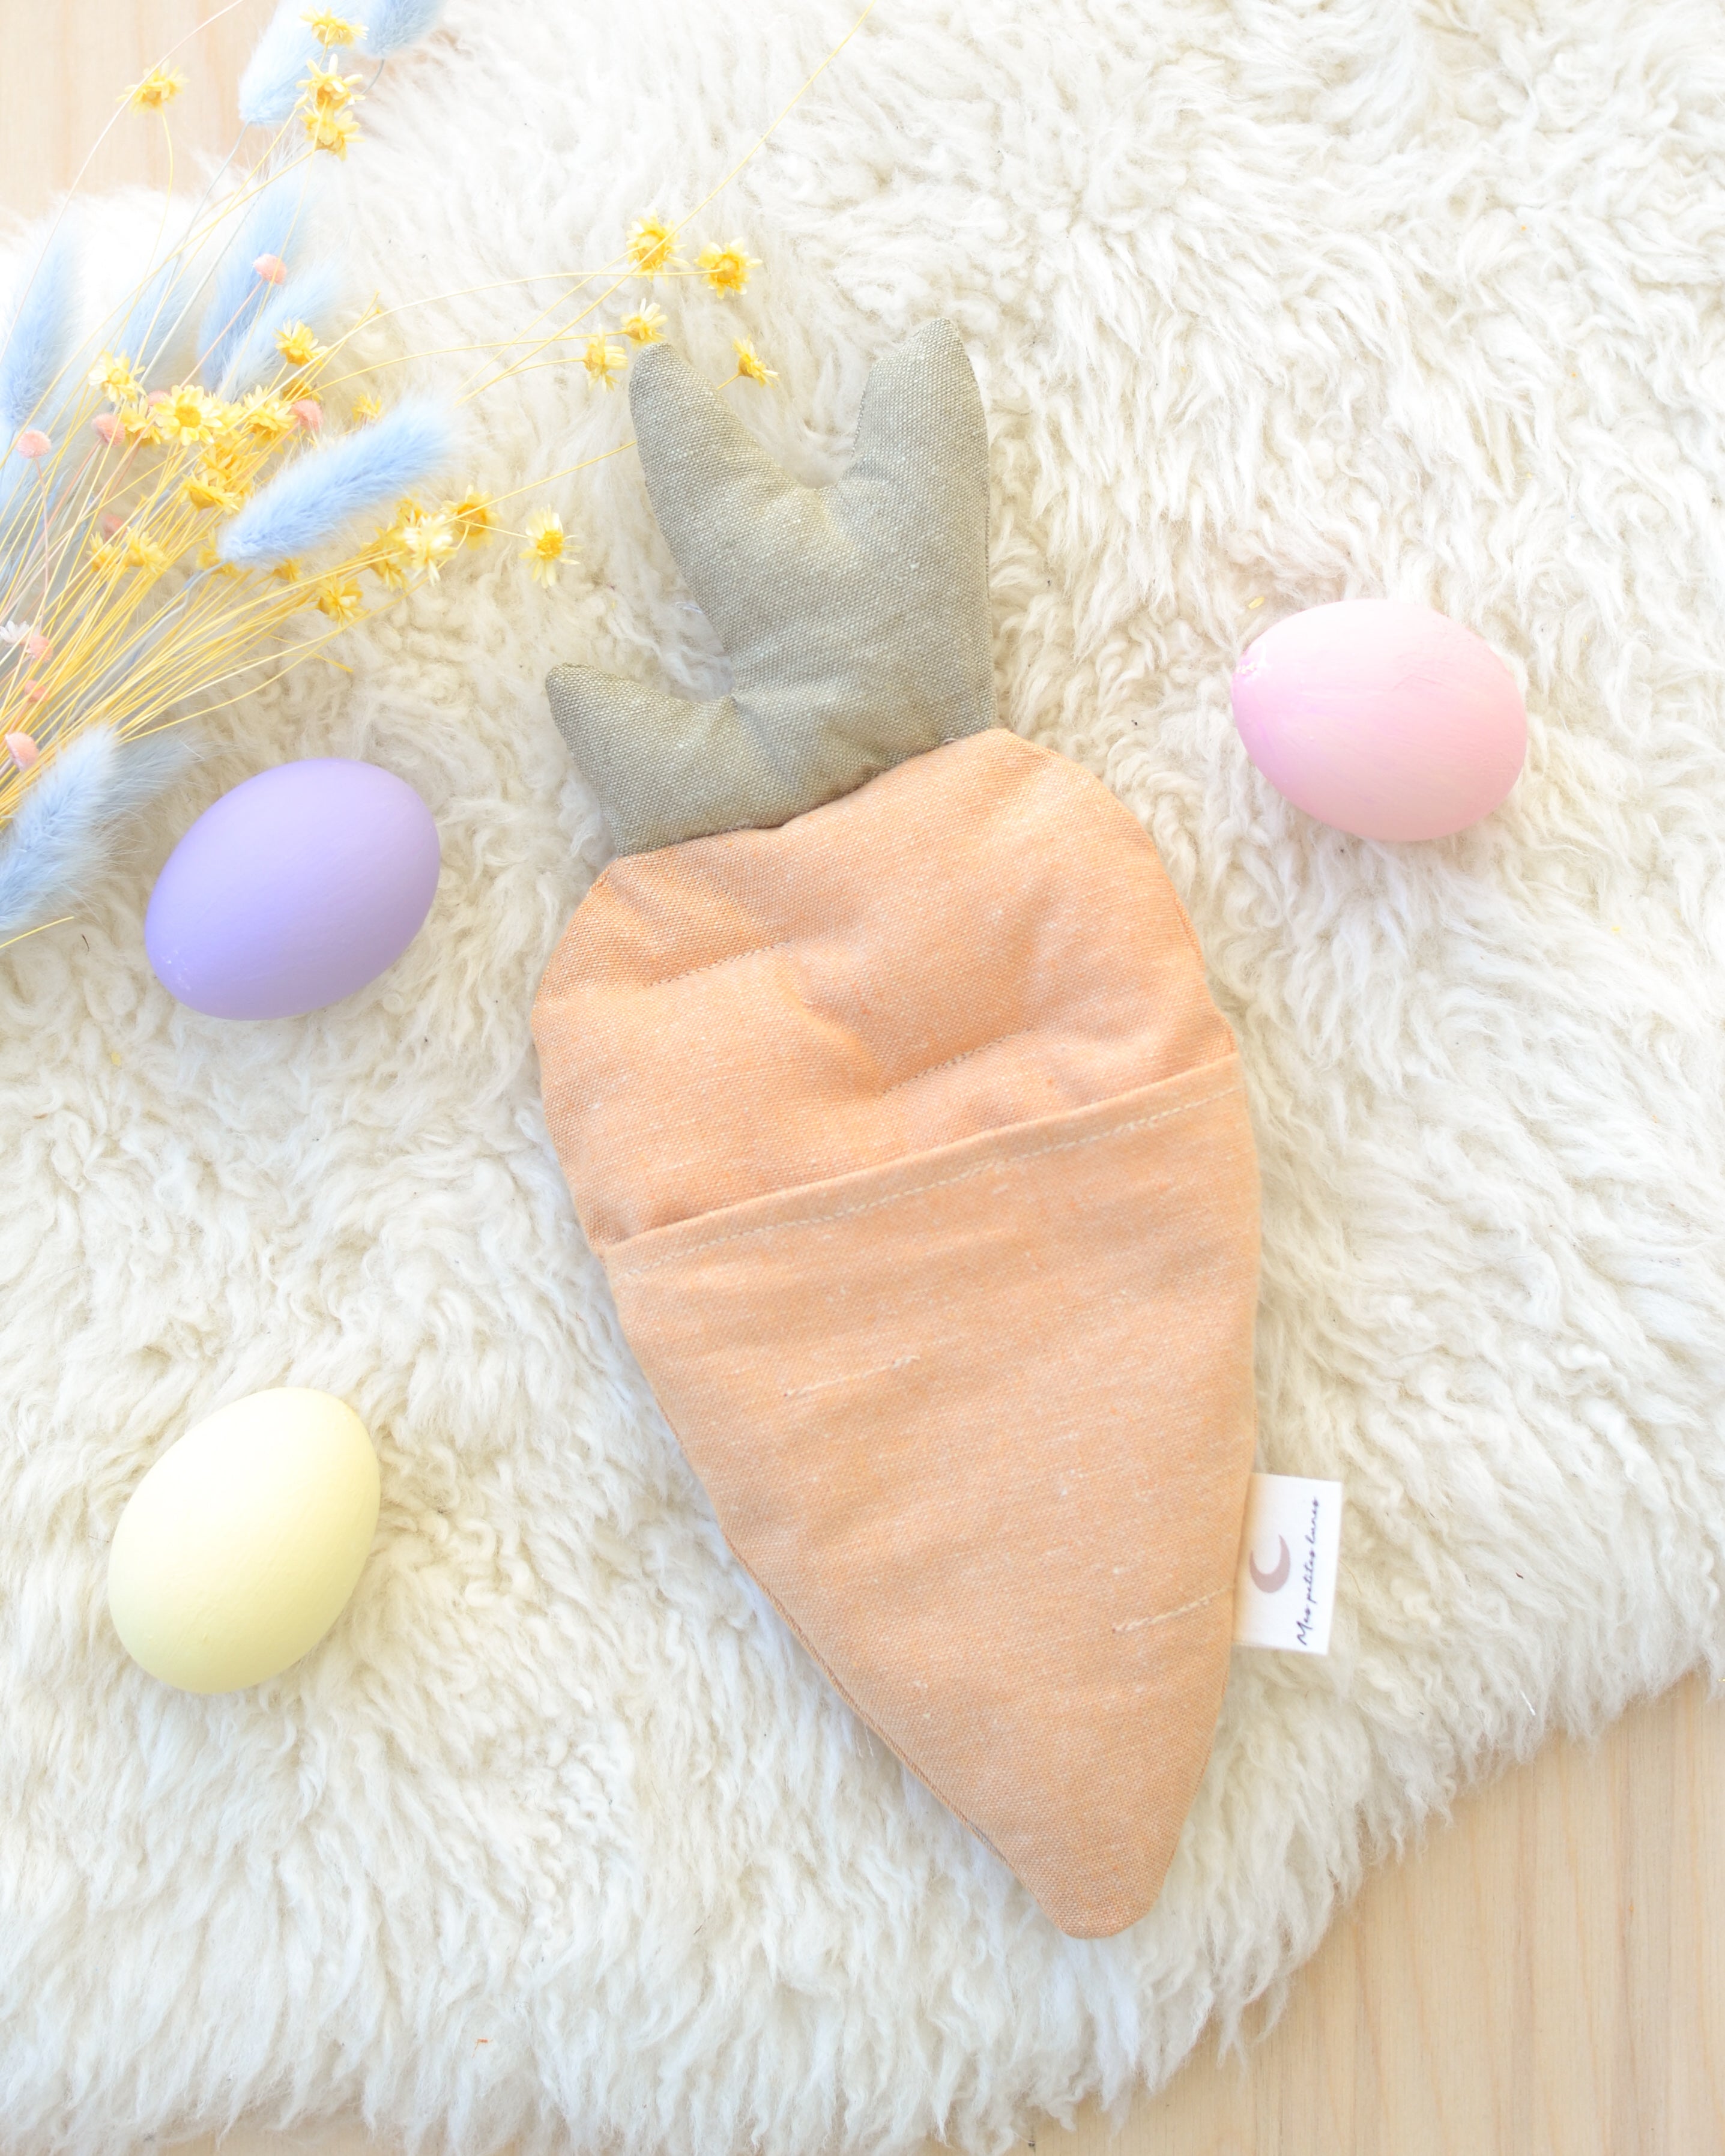 Mini bunny and carrot-shaped bed